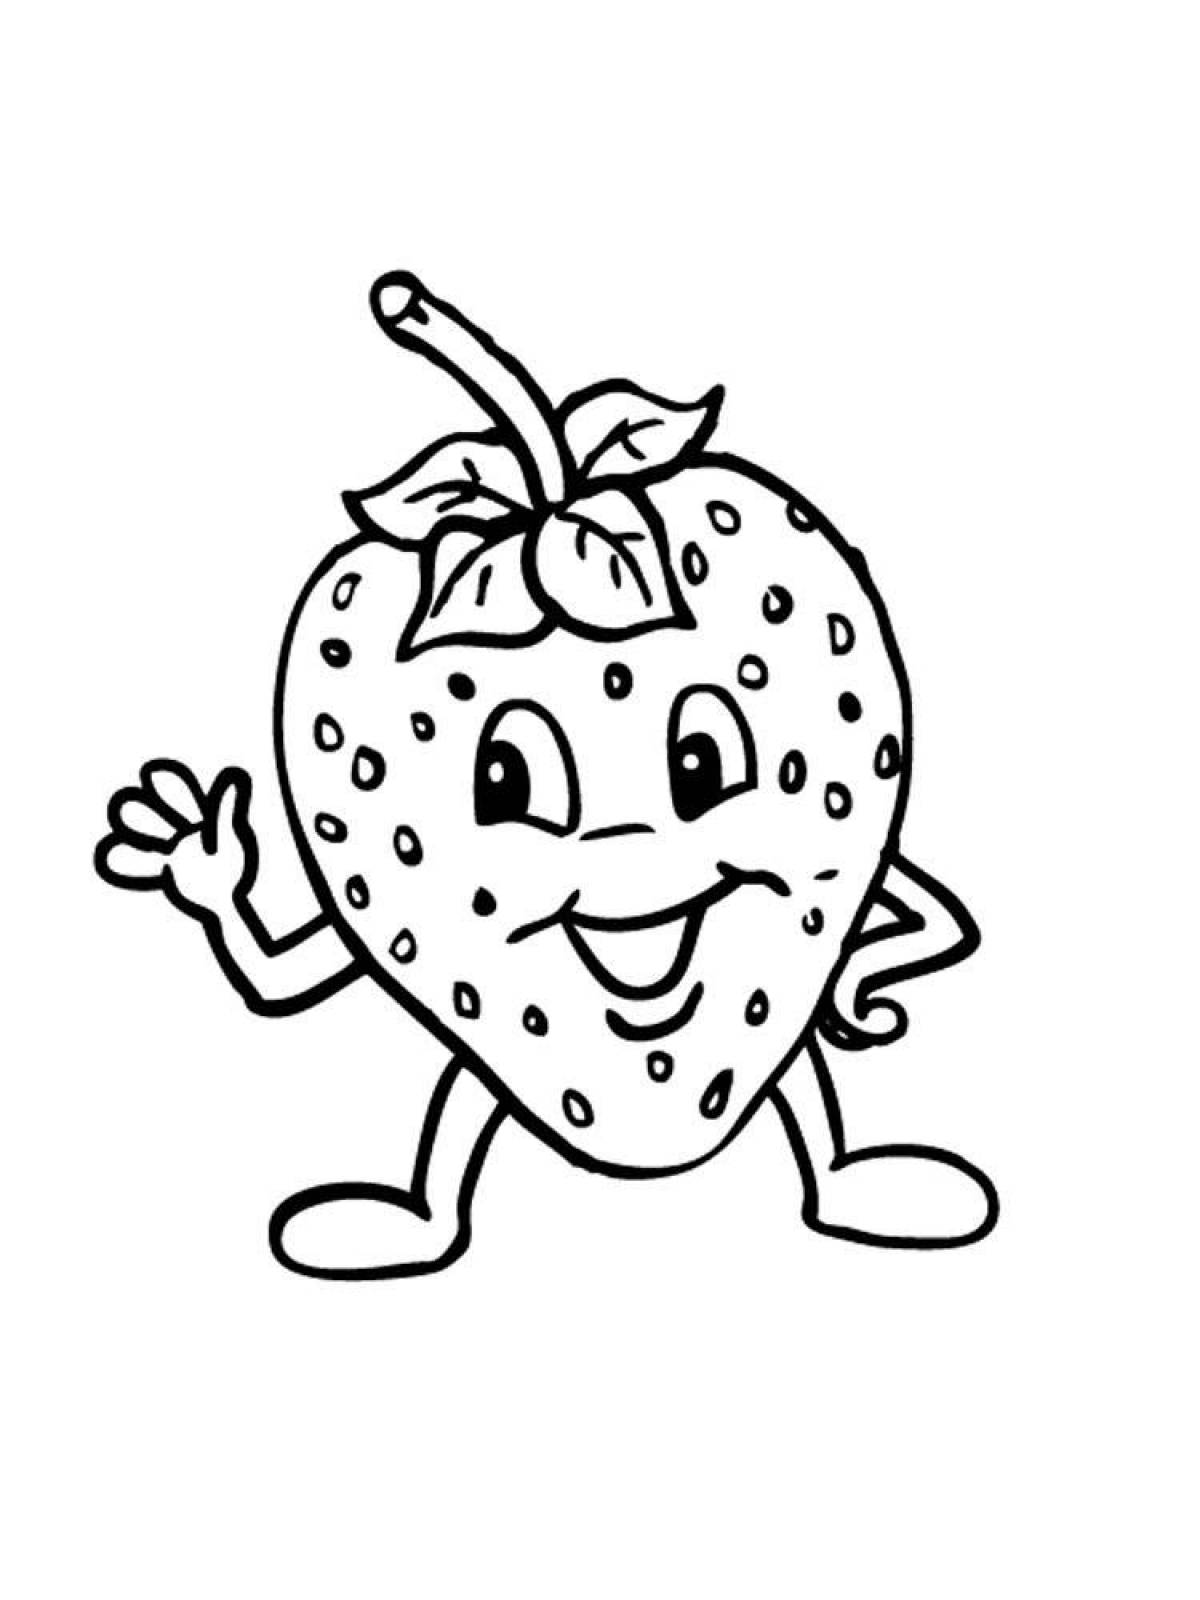 Sparkling strawberry coloring book for kids